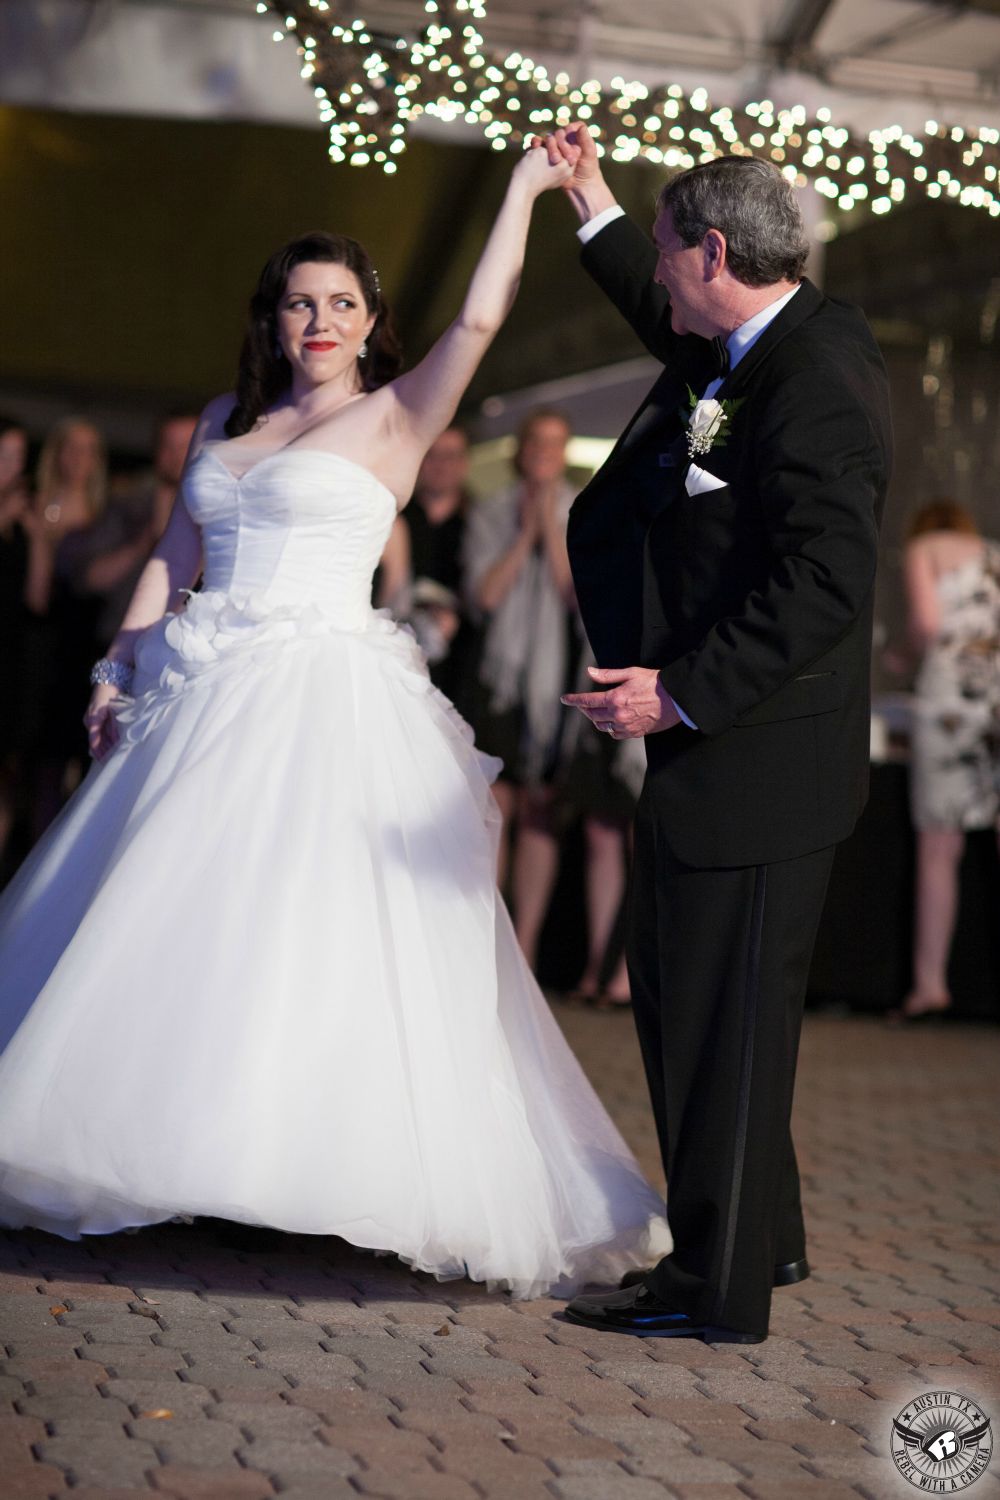 Picture of happy bride in White by Vera Wang wedding gown from David's Bridal and red lipstick and her father in black tuxedo dancing the father-daughter dance at the wedding reception under the winter tent with twinkly lights in the trees at the Allan House wedding venue in downtown Austin, Texas.